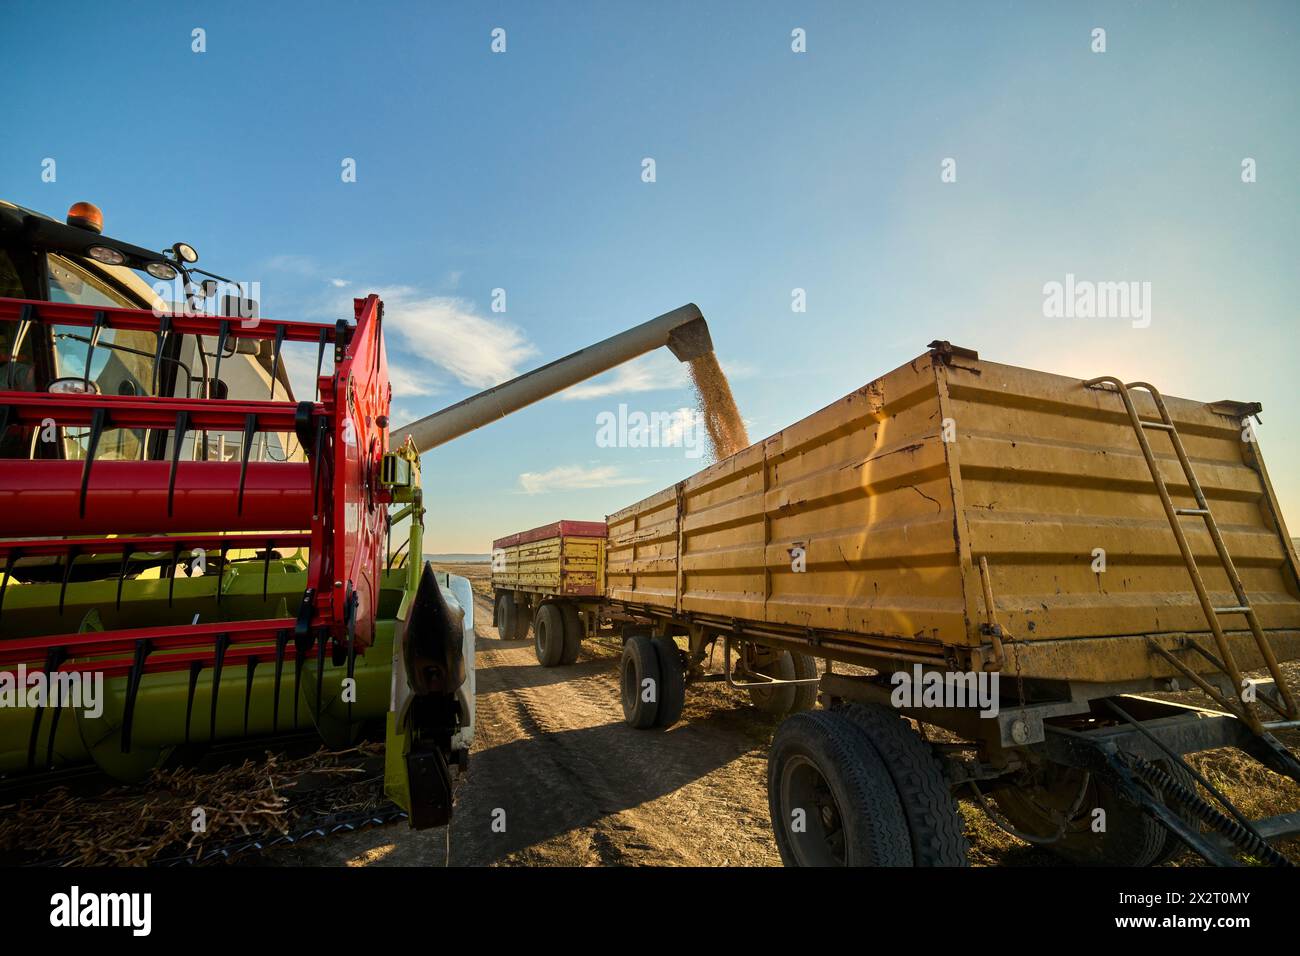 Combine harvester unloading freshly harvested soybeans in truck at farm Stock Photo